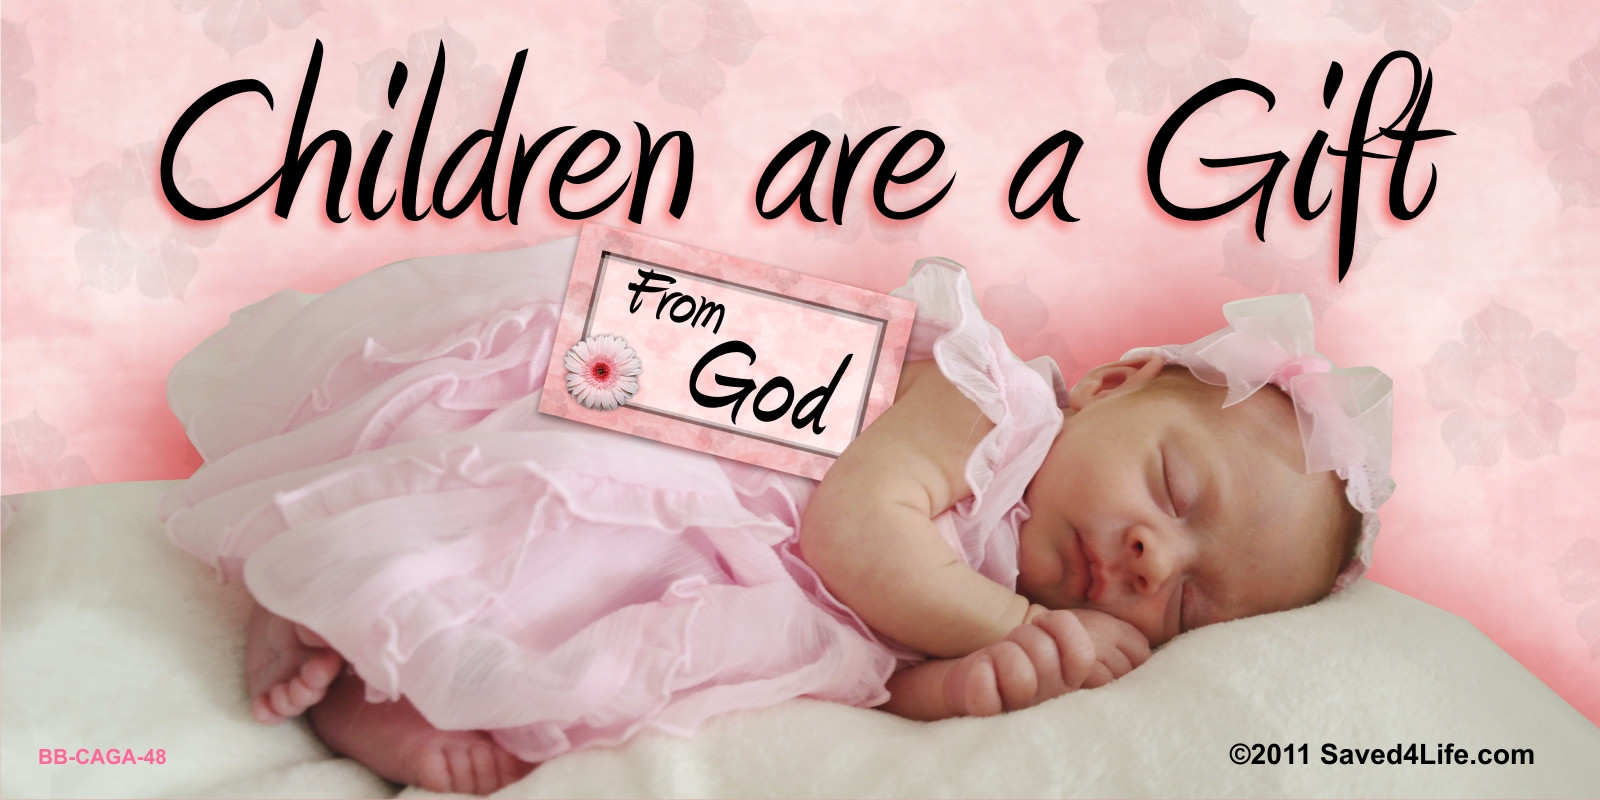 Children A Gift From God
 Children are a Gift from God Billboard Children are a Gift